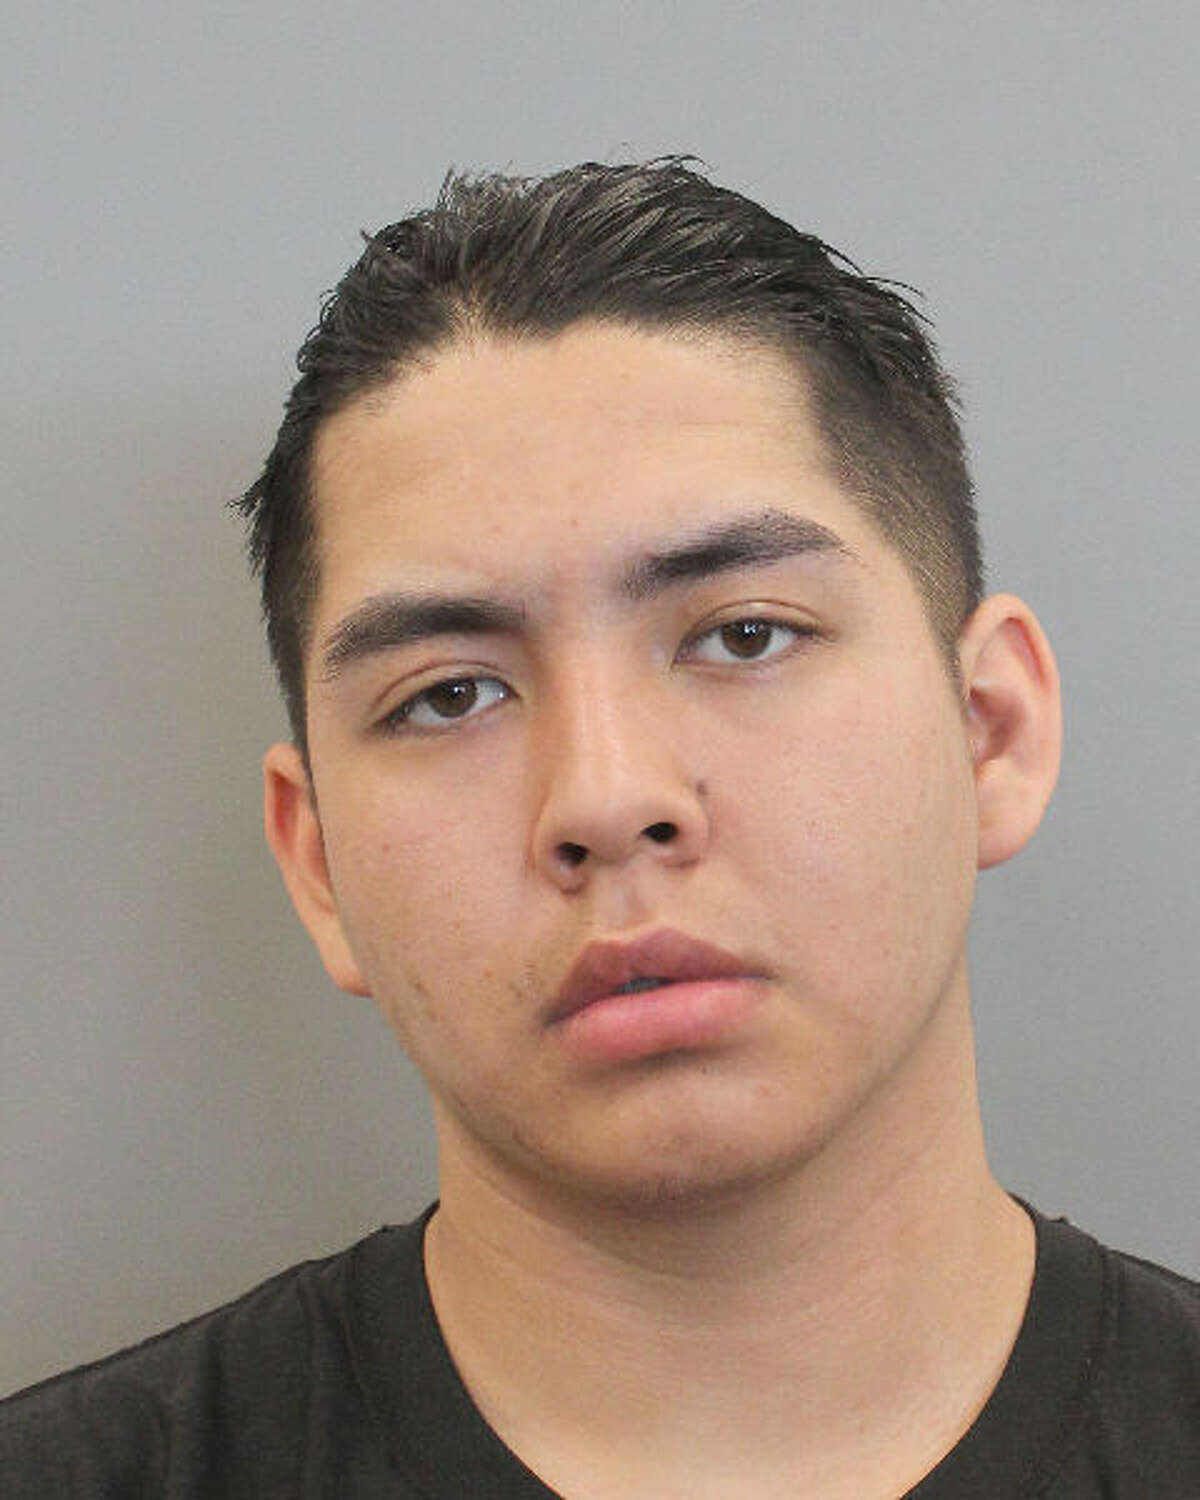 Leroy Lopez, 17, was charged with murder and tampering with evidence in connection to a body found Monday in east Harris County.